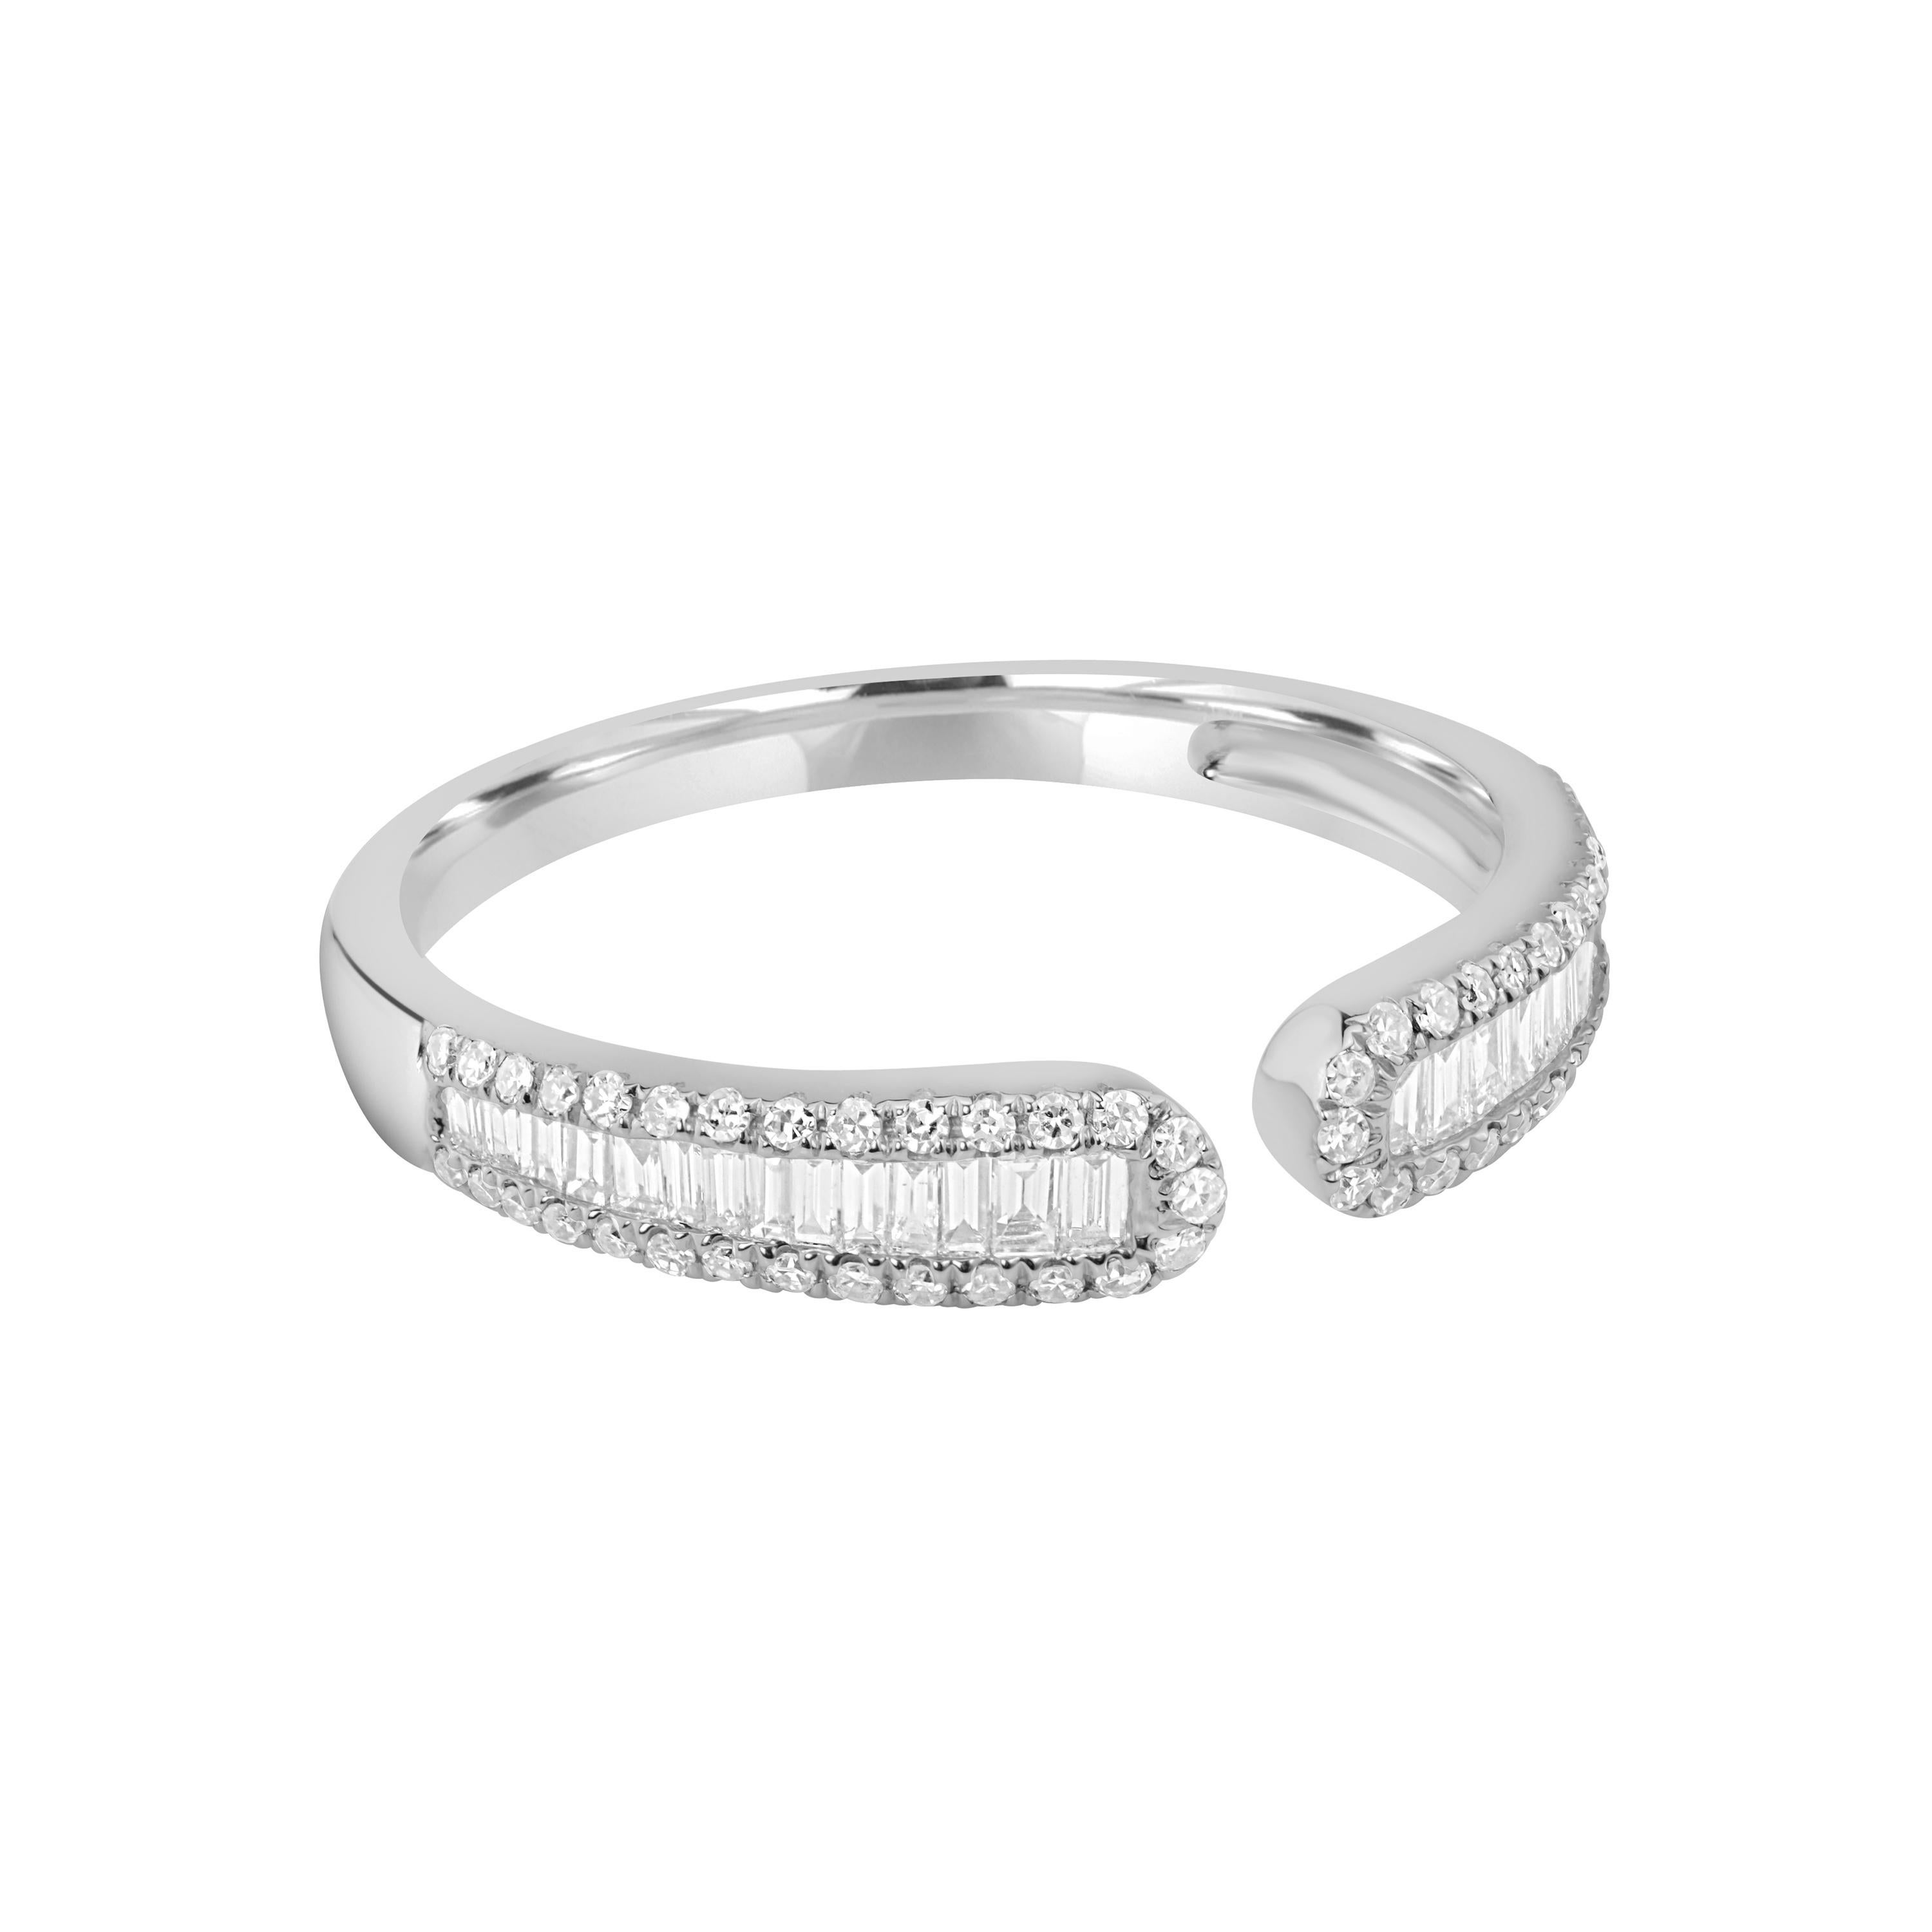 Luxle Baguette Diamond Cuff Ring in 14k White Gold In New Condition For Sale In New York, NY